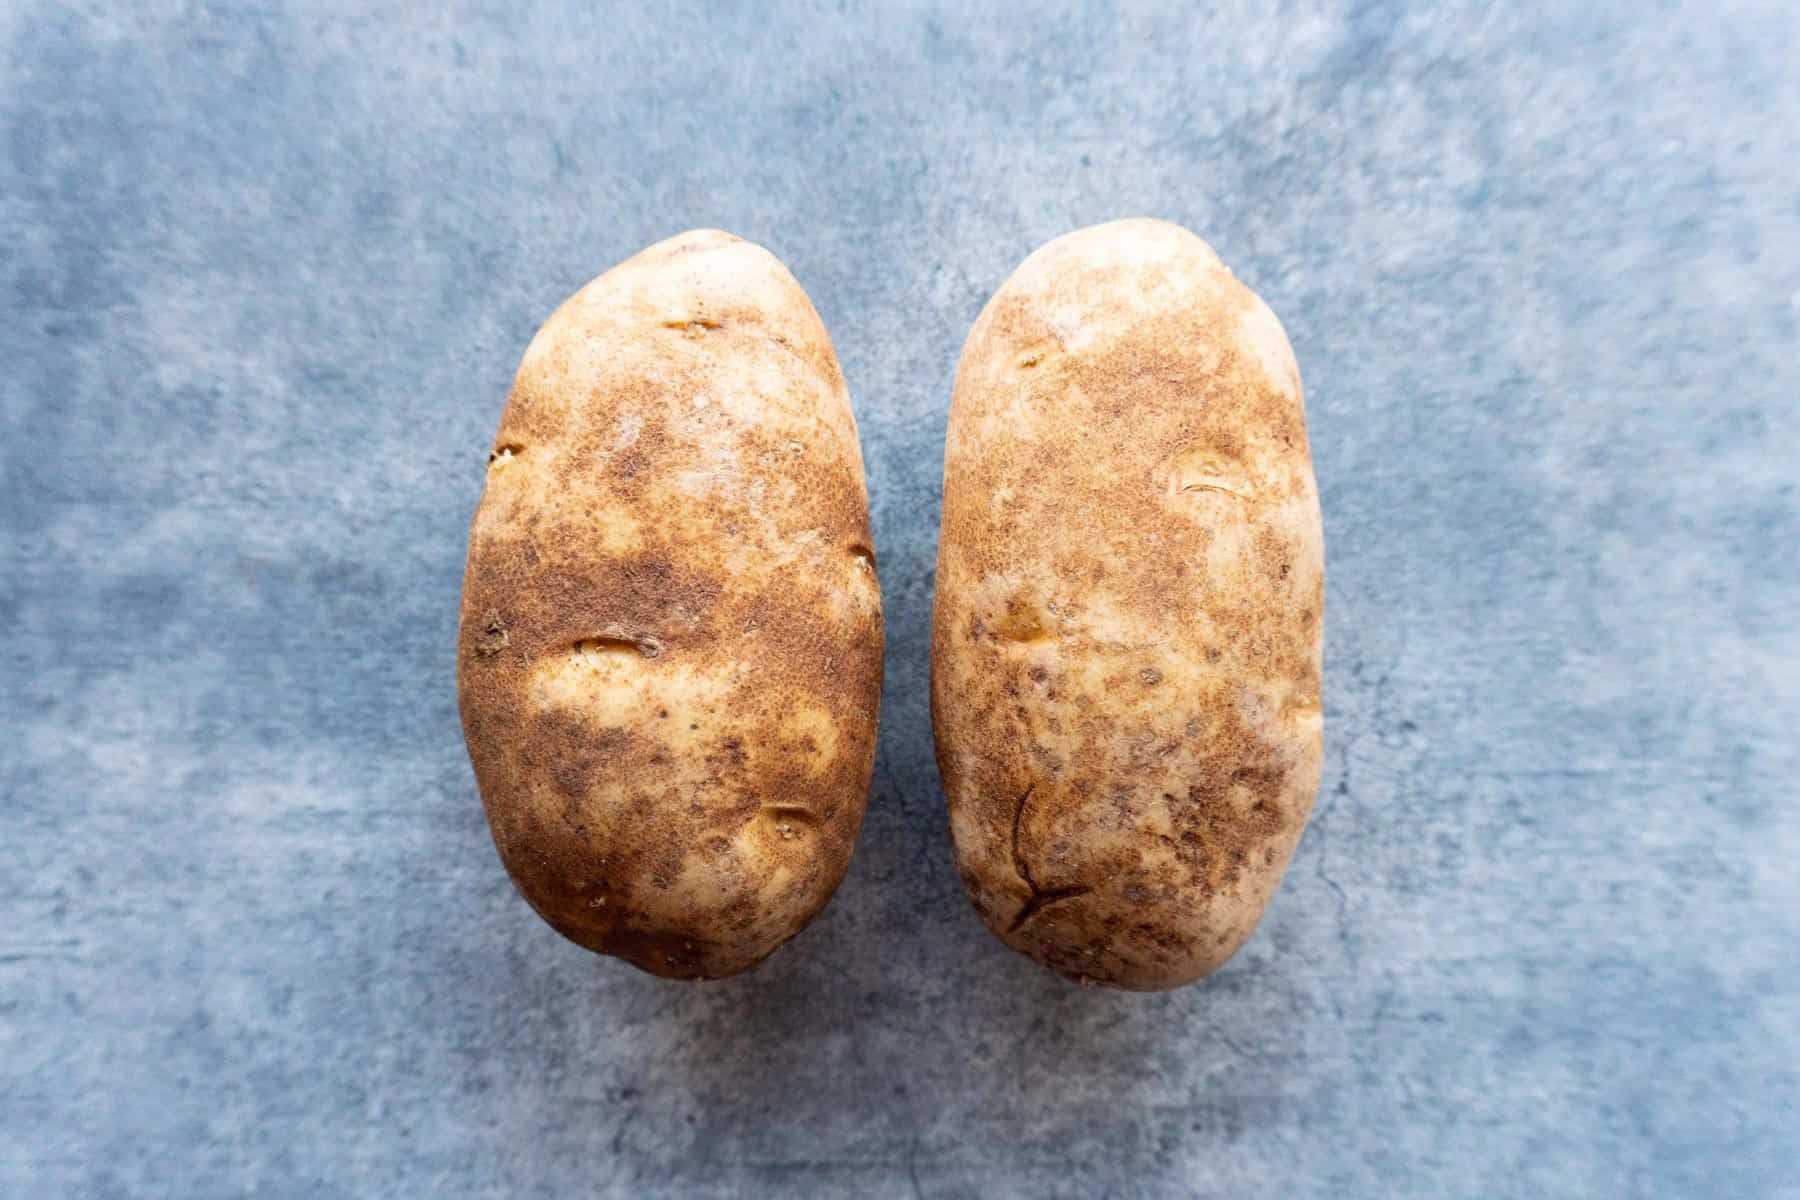 two russet potatoes side by side